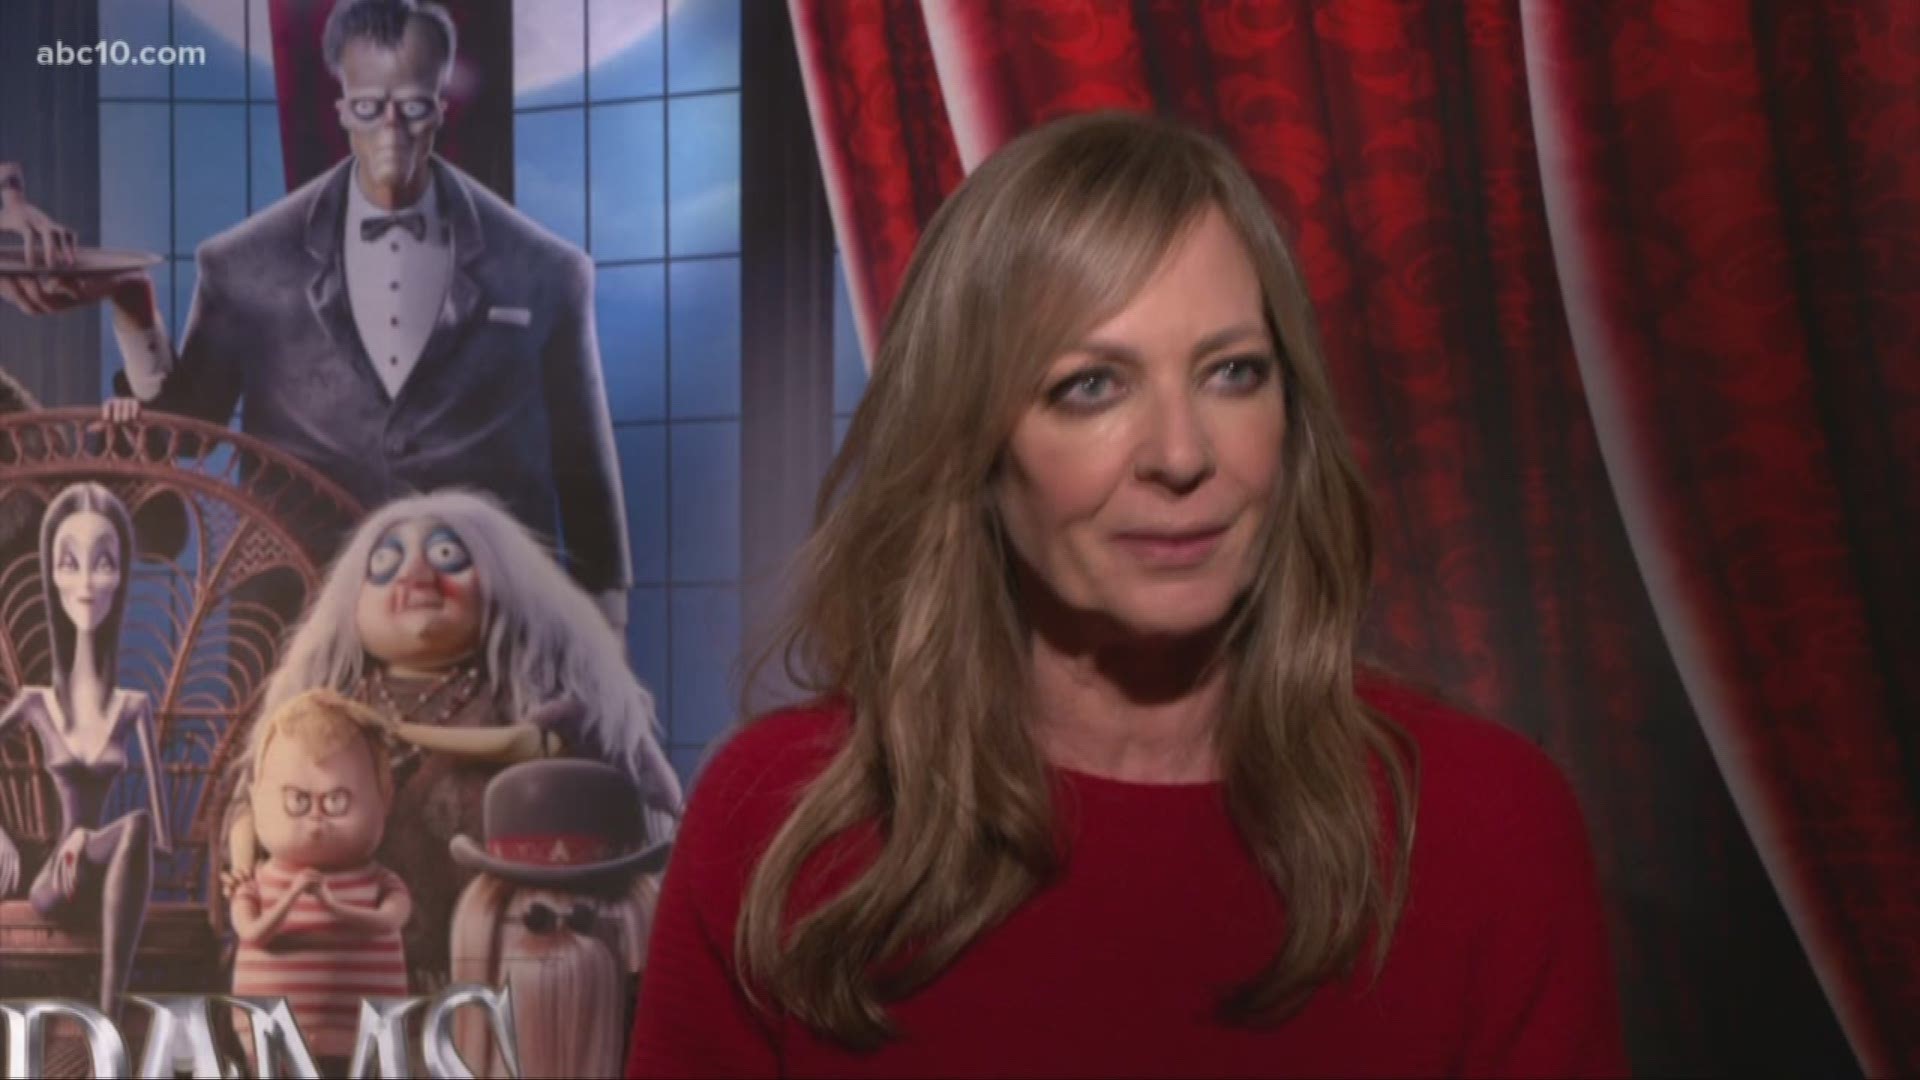 Mark S. Allen talks with Allison Janney about her family and shares a special deal for 'The Addams Family' tickets.